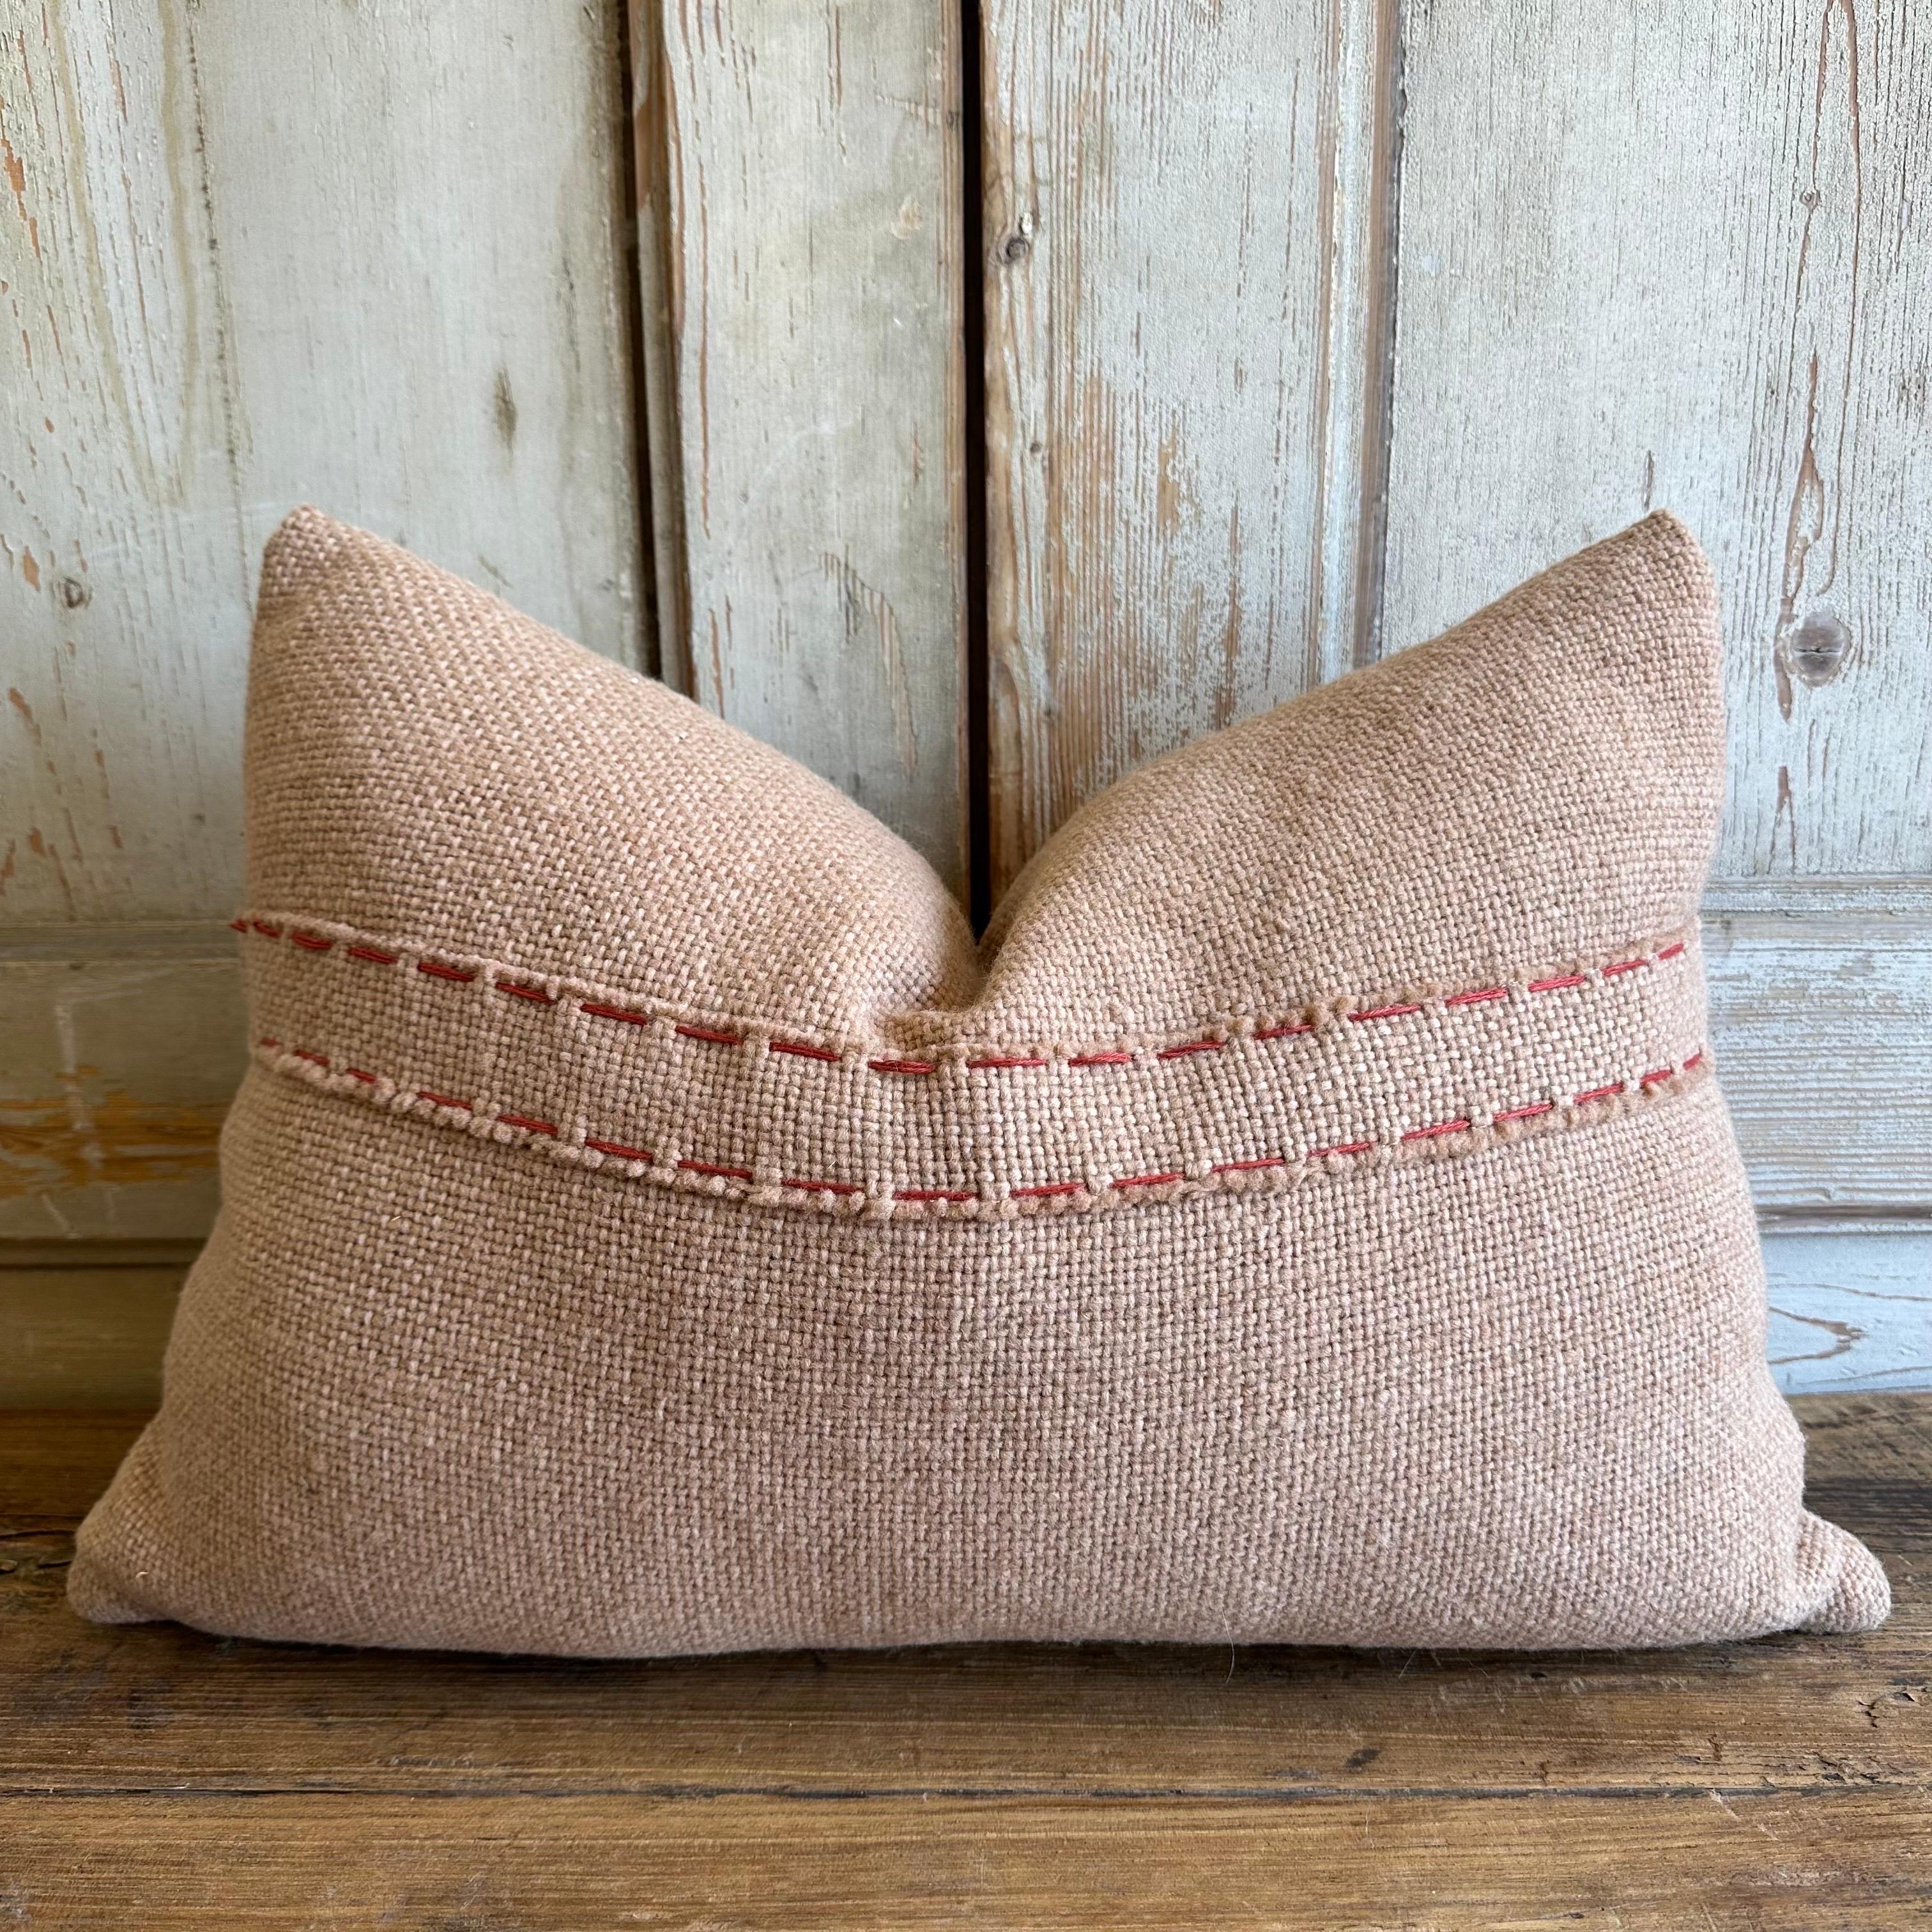 Custom Hand Stitched Wool Patchwork Pillow in Blush Wool In New Condition For Sale In Brea, CA